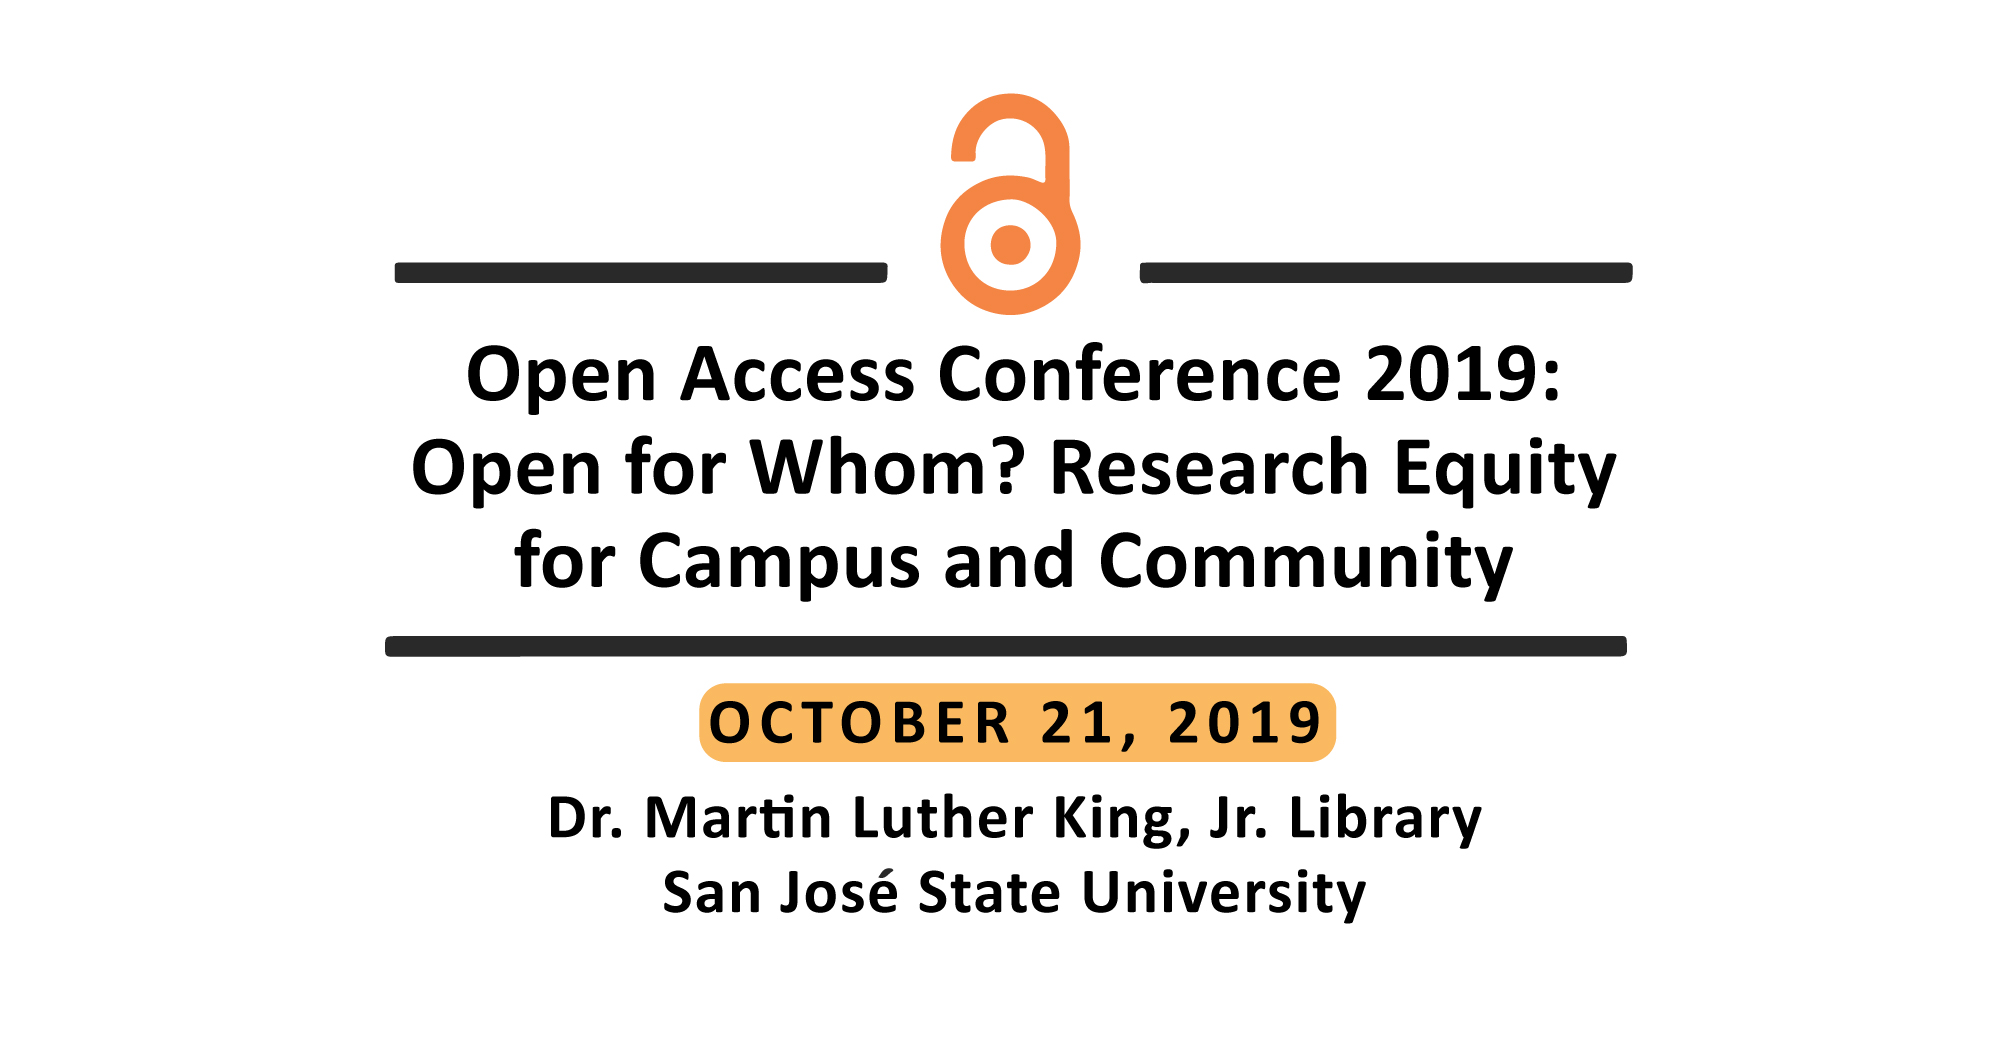 Open Access Conference 2019: Open For Whom?: Research Equity for Campus and Community